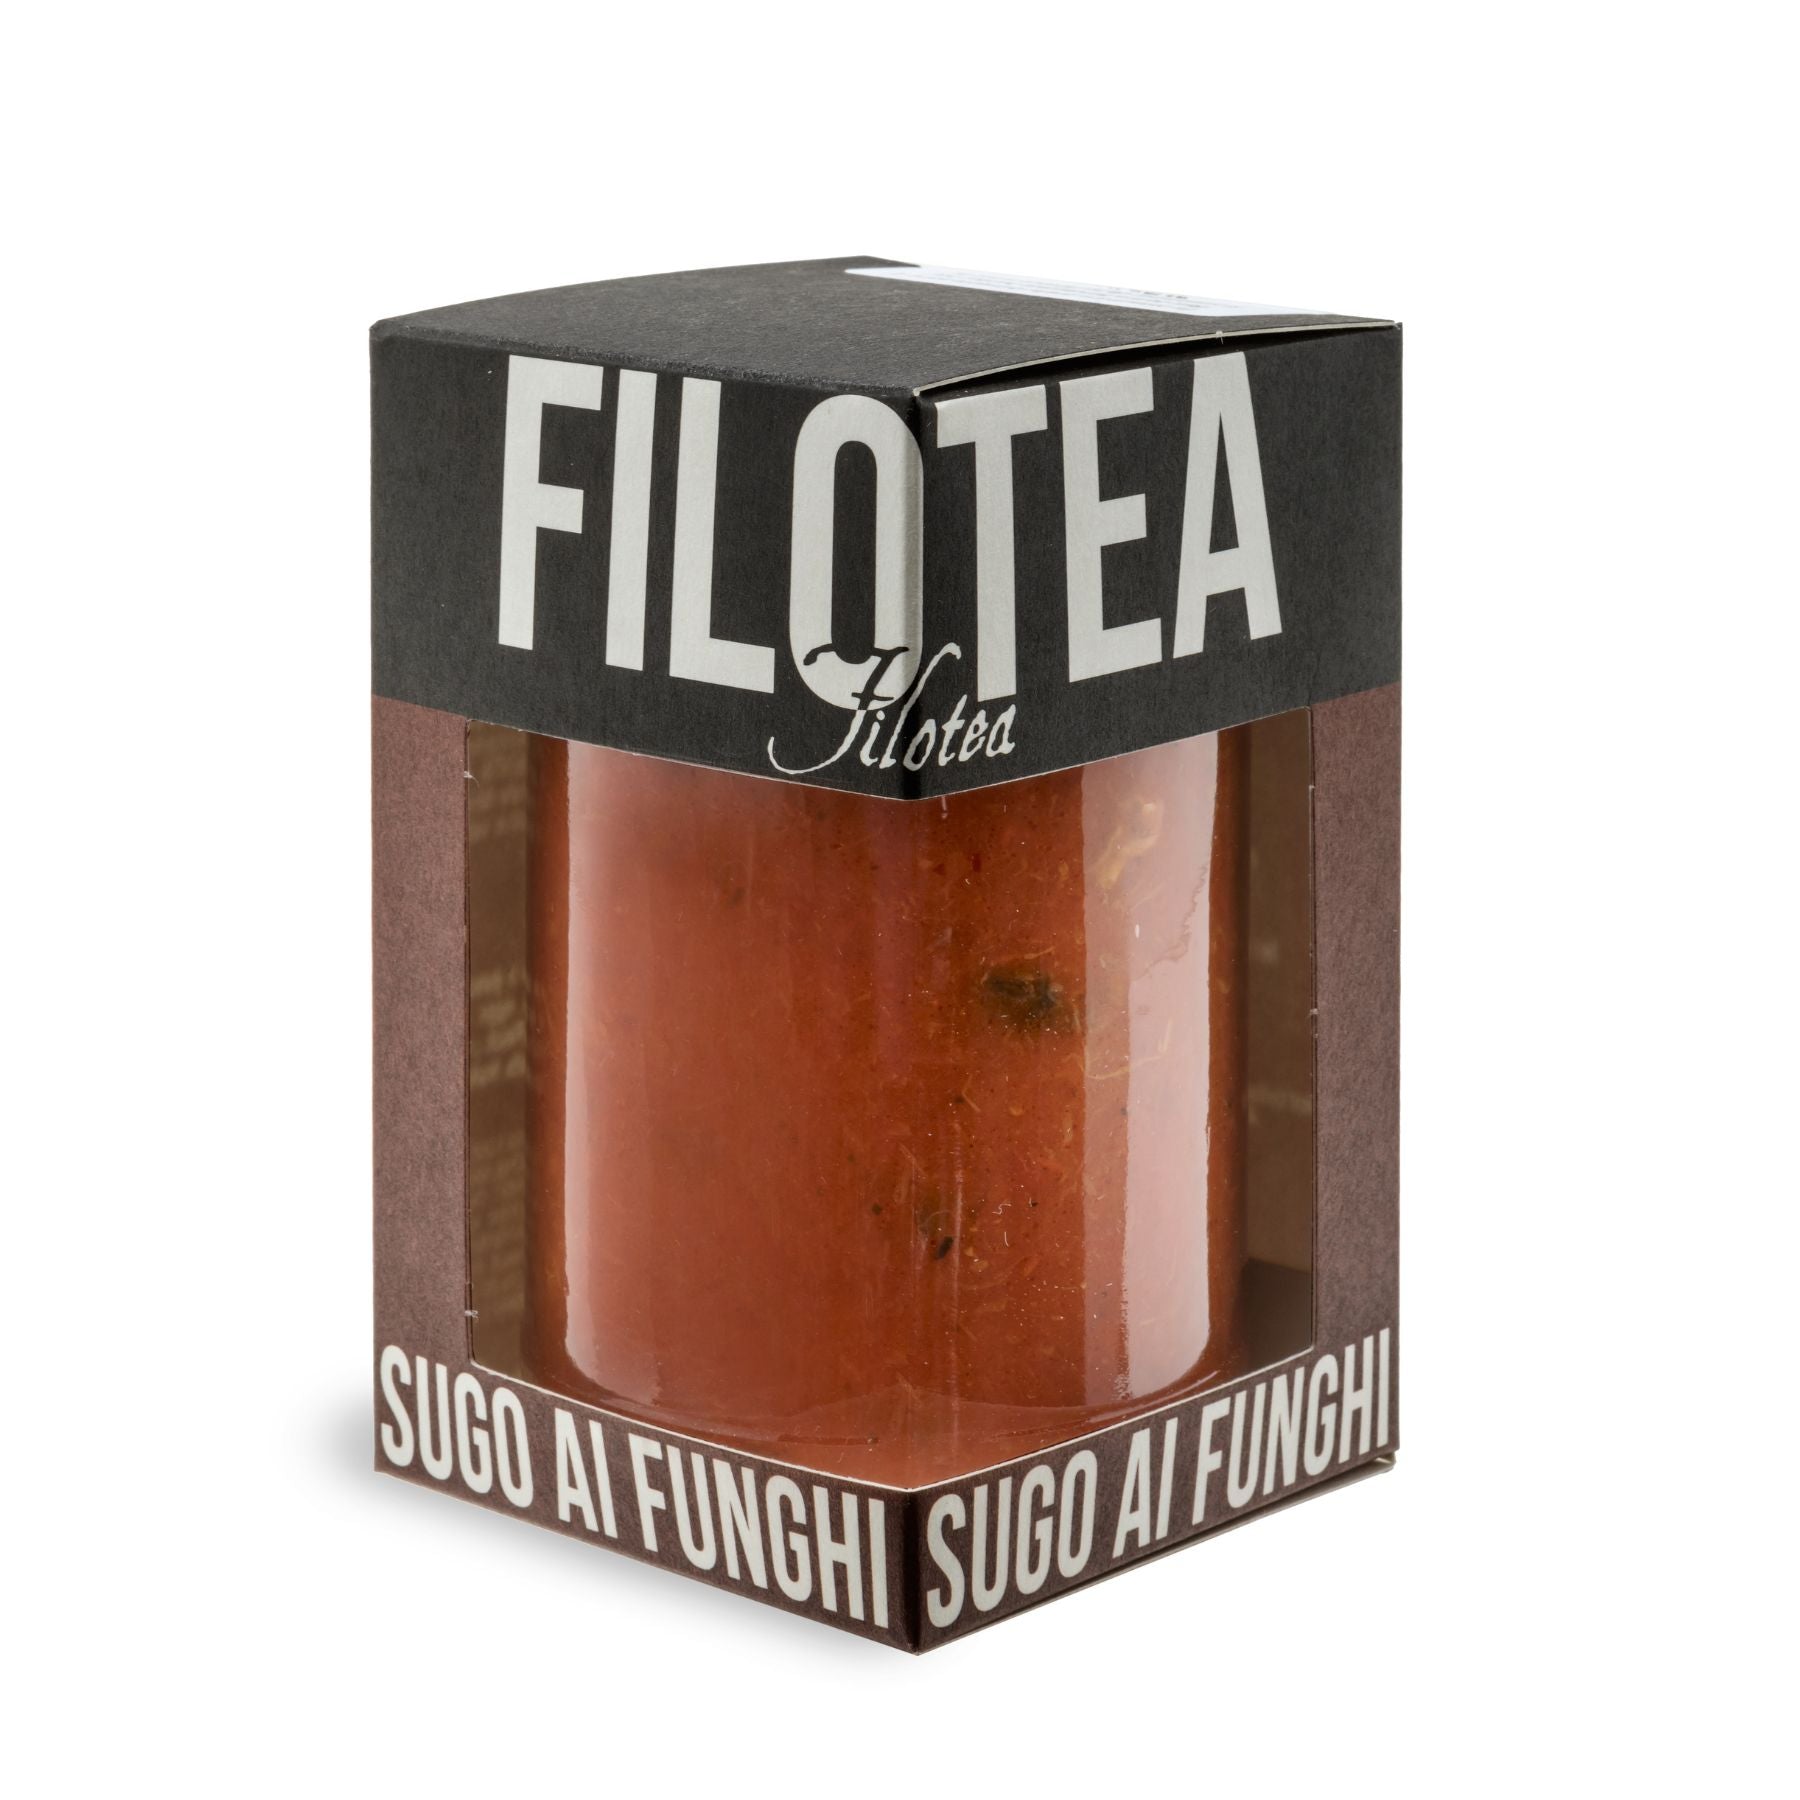 Filotea Mushroom Pasta Sauce 280g | Imported and distributed in the UK by Just Gourmet Foods